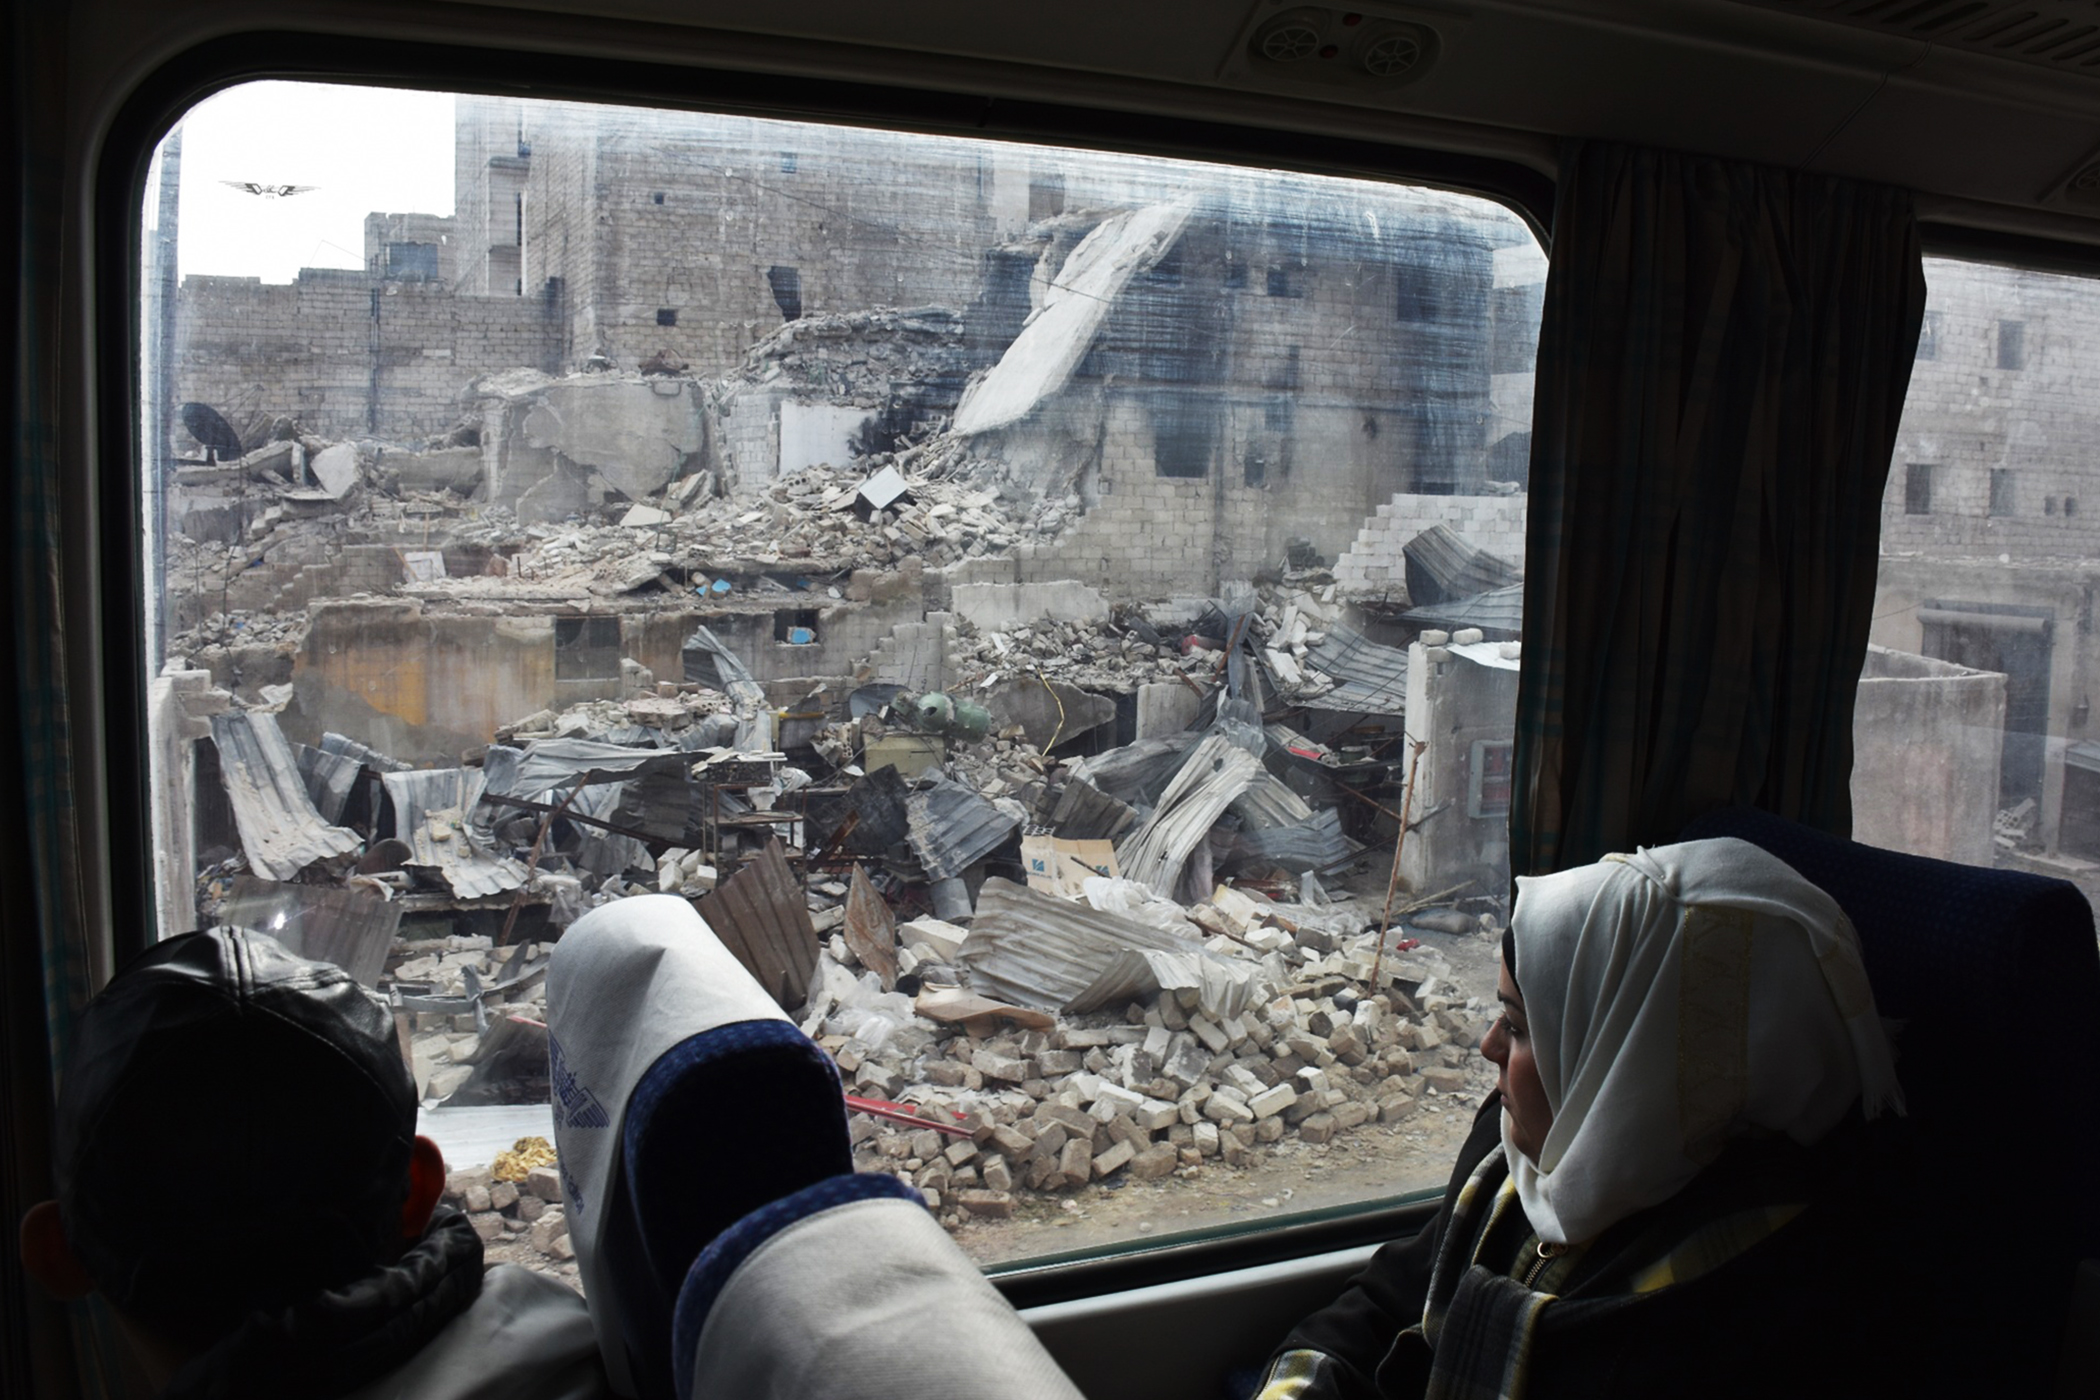 A Syrian woman peers out the window as she sits in a train travelling through Aleppo's devastated eastern districts for the first time in more than four years, on January 25, 2017. It is the train's first such trip since rebels overran east Aleppo in the summer of 2012, effectively dividing the northern city into a regime-held west and a rebel-controlled east. / AFP PHOTO / George OURFALIAN